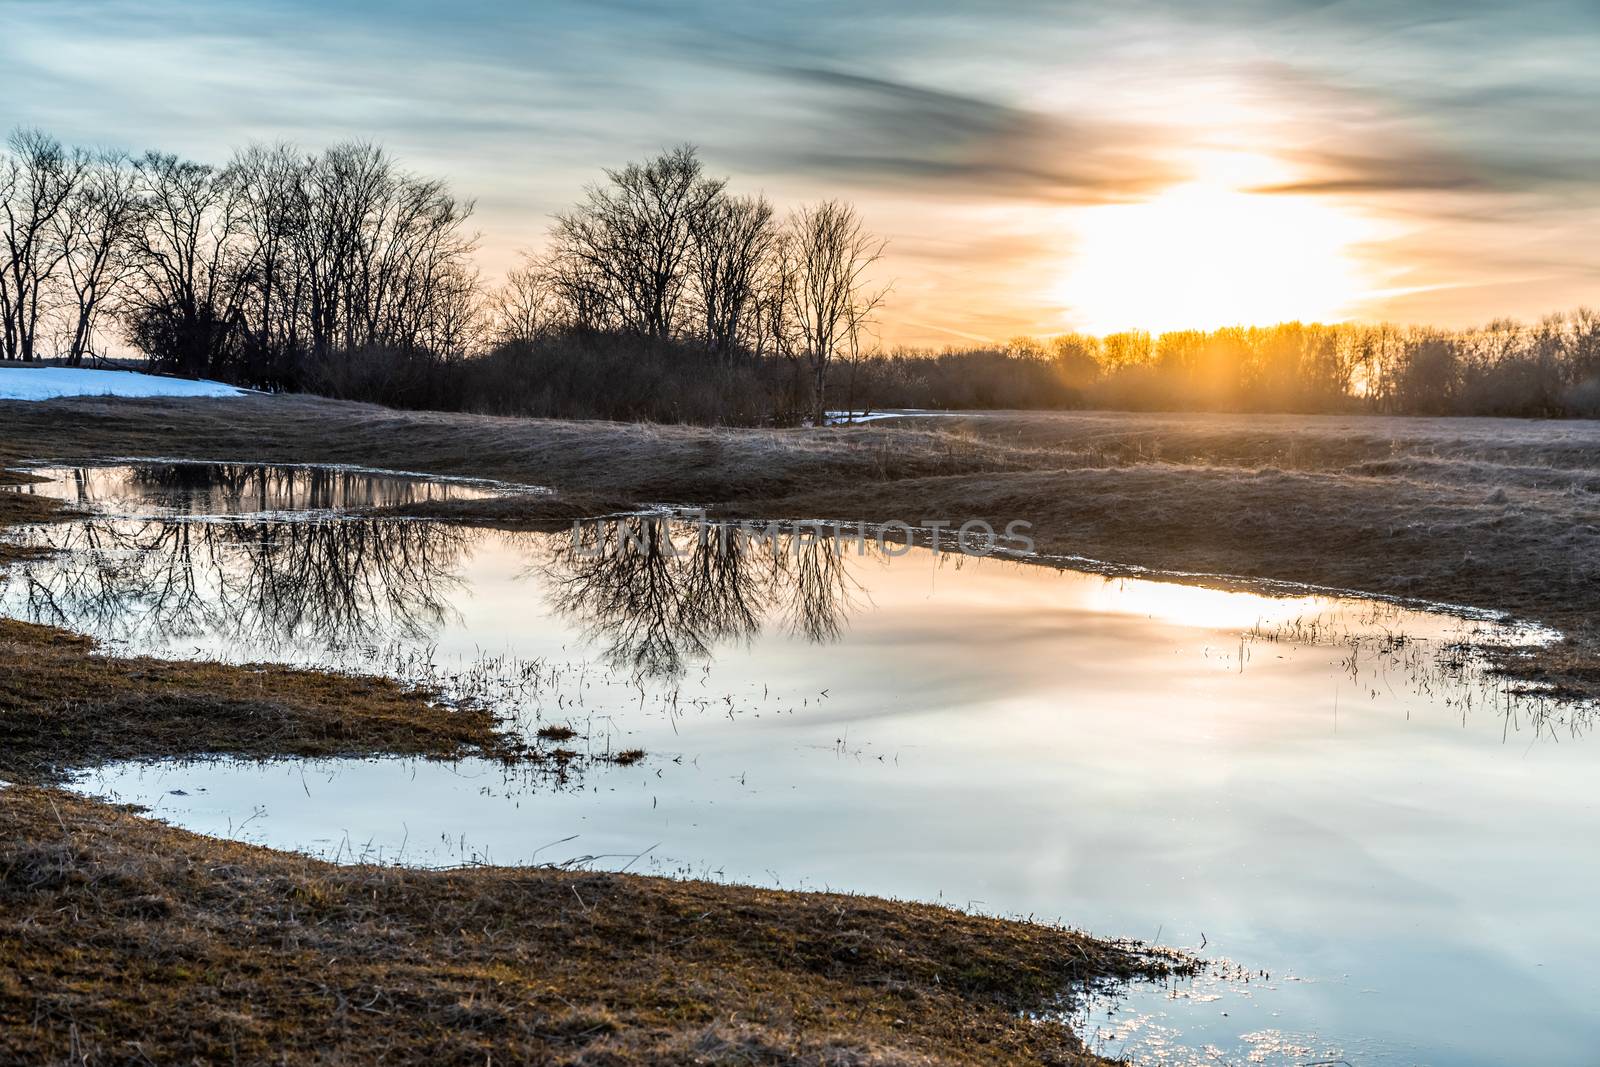 Flooded trees and frozen water in the floodplain of the river at the thaws. by sveter